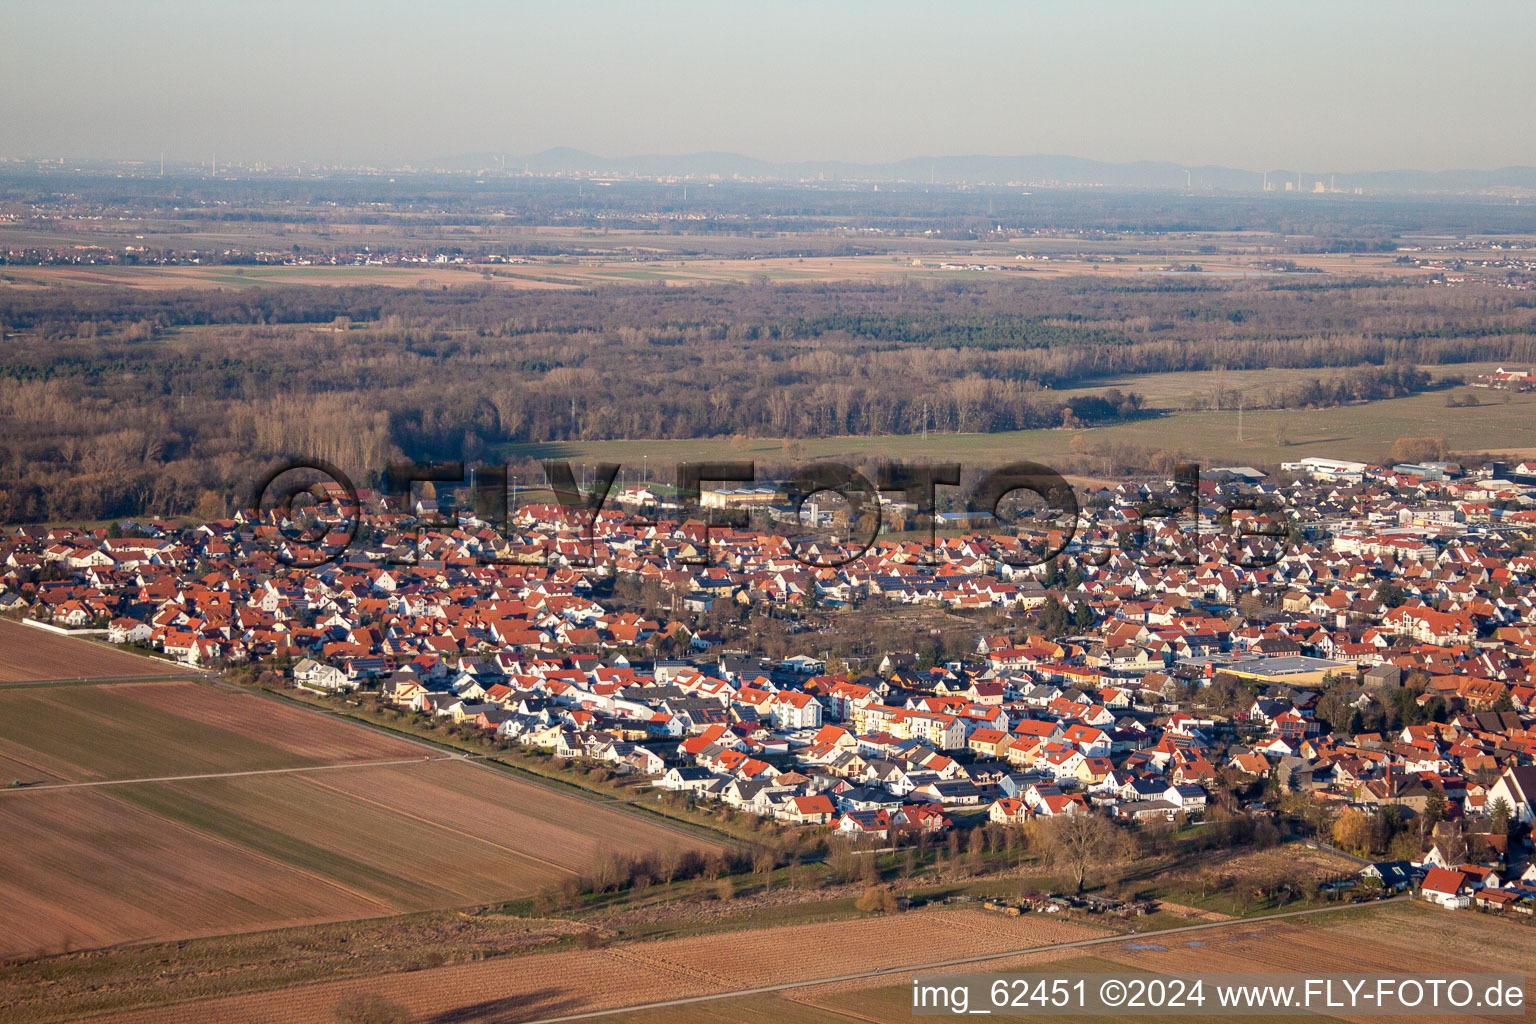 Offenbach an der Queich in the state Rhineland-Palatinate, Germany viewn from the air